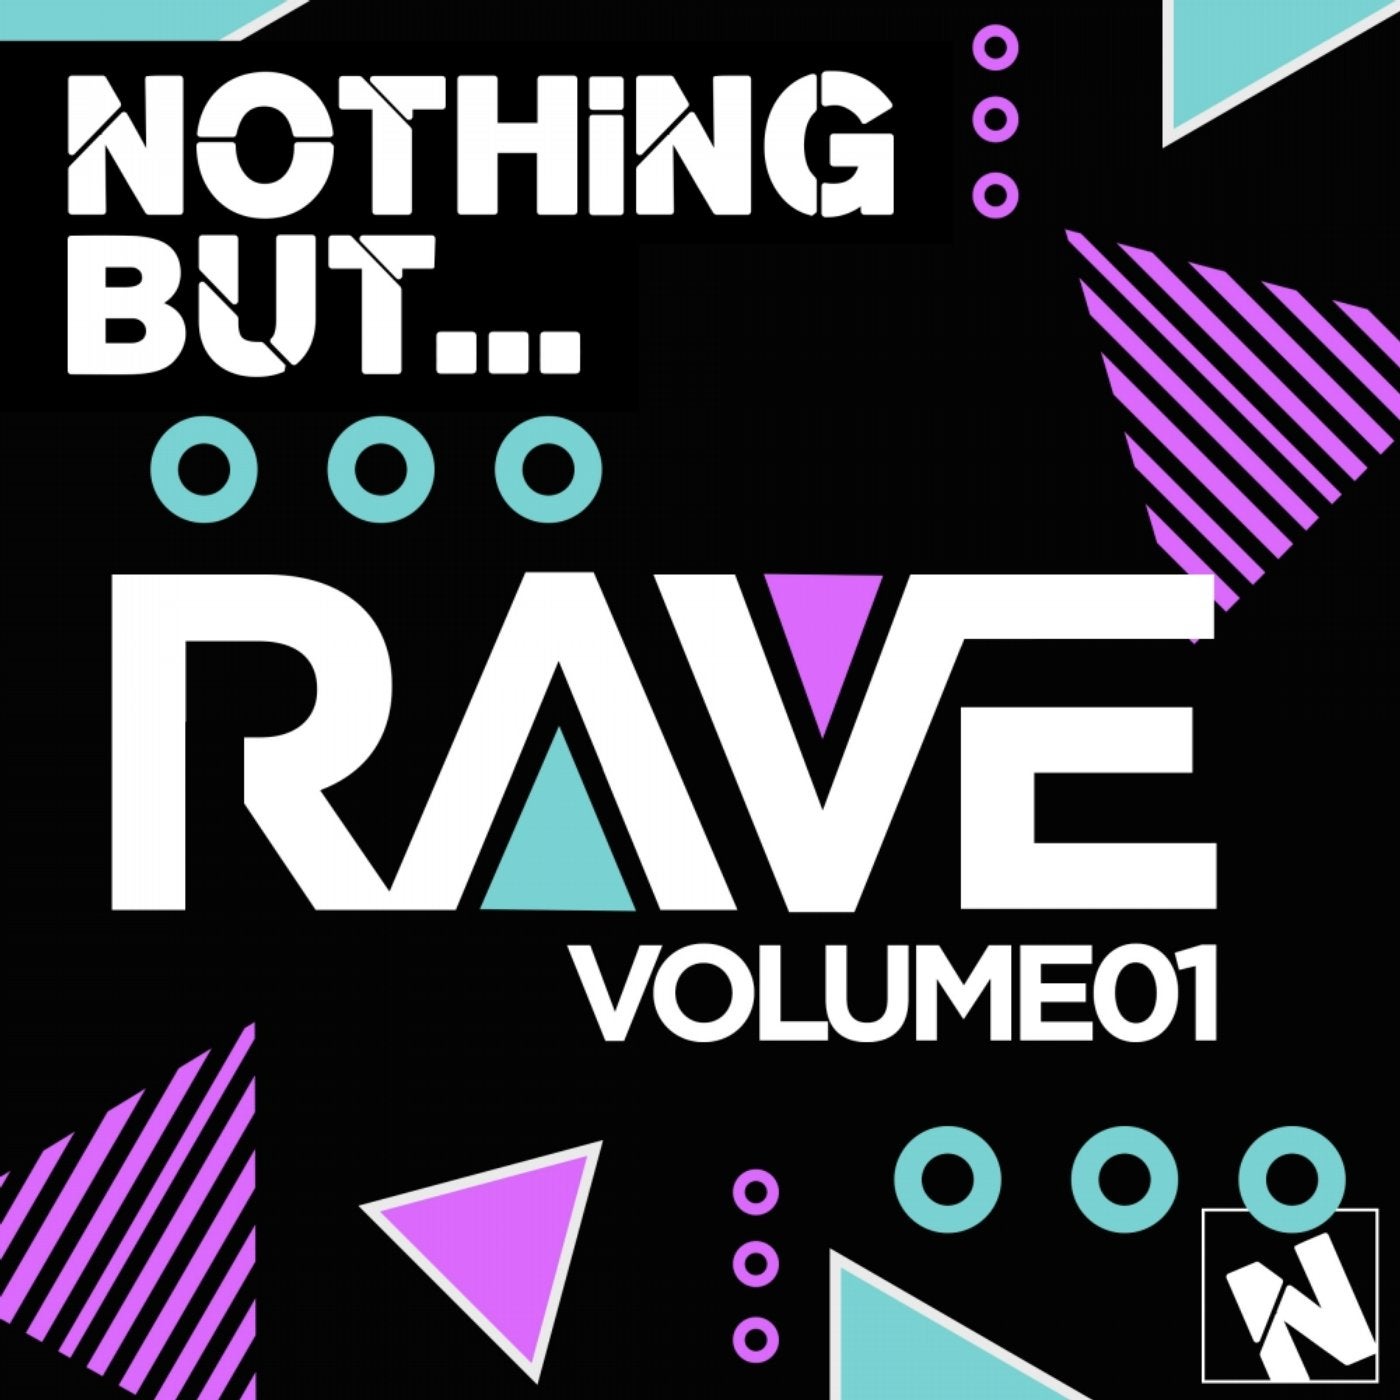 Nothing But... Rave, Vol. 1